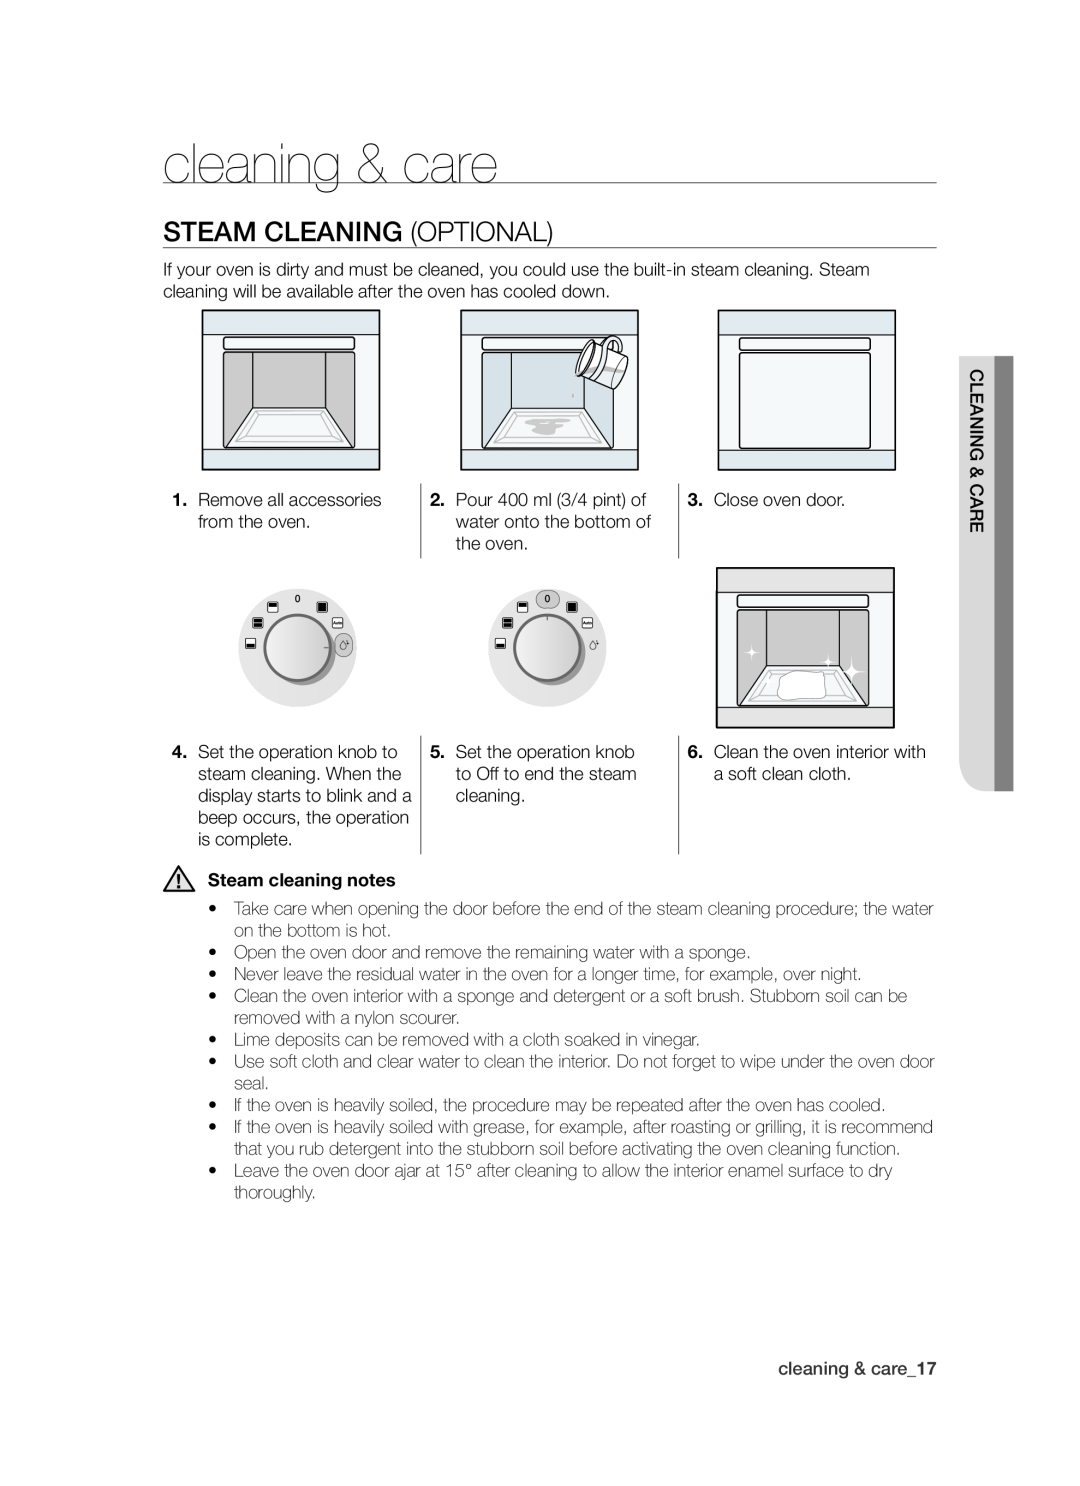 Samsung BT621 Series user manual Steam Cleaning Optional, cleaning & care17 